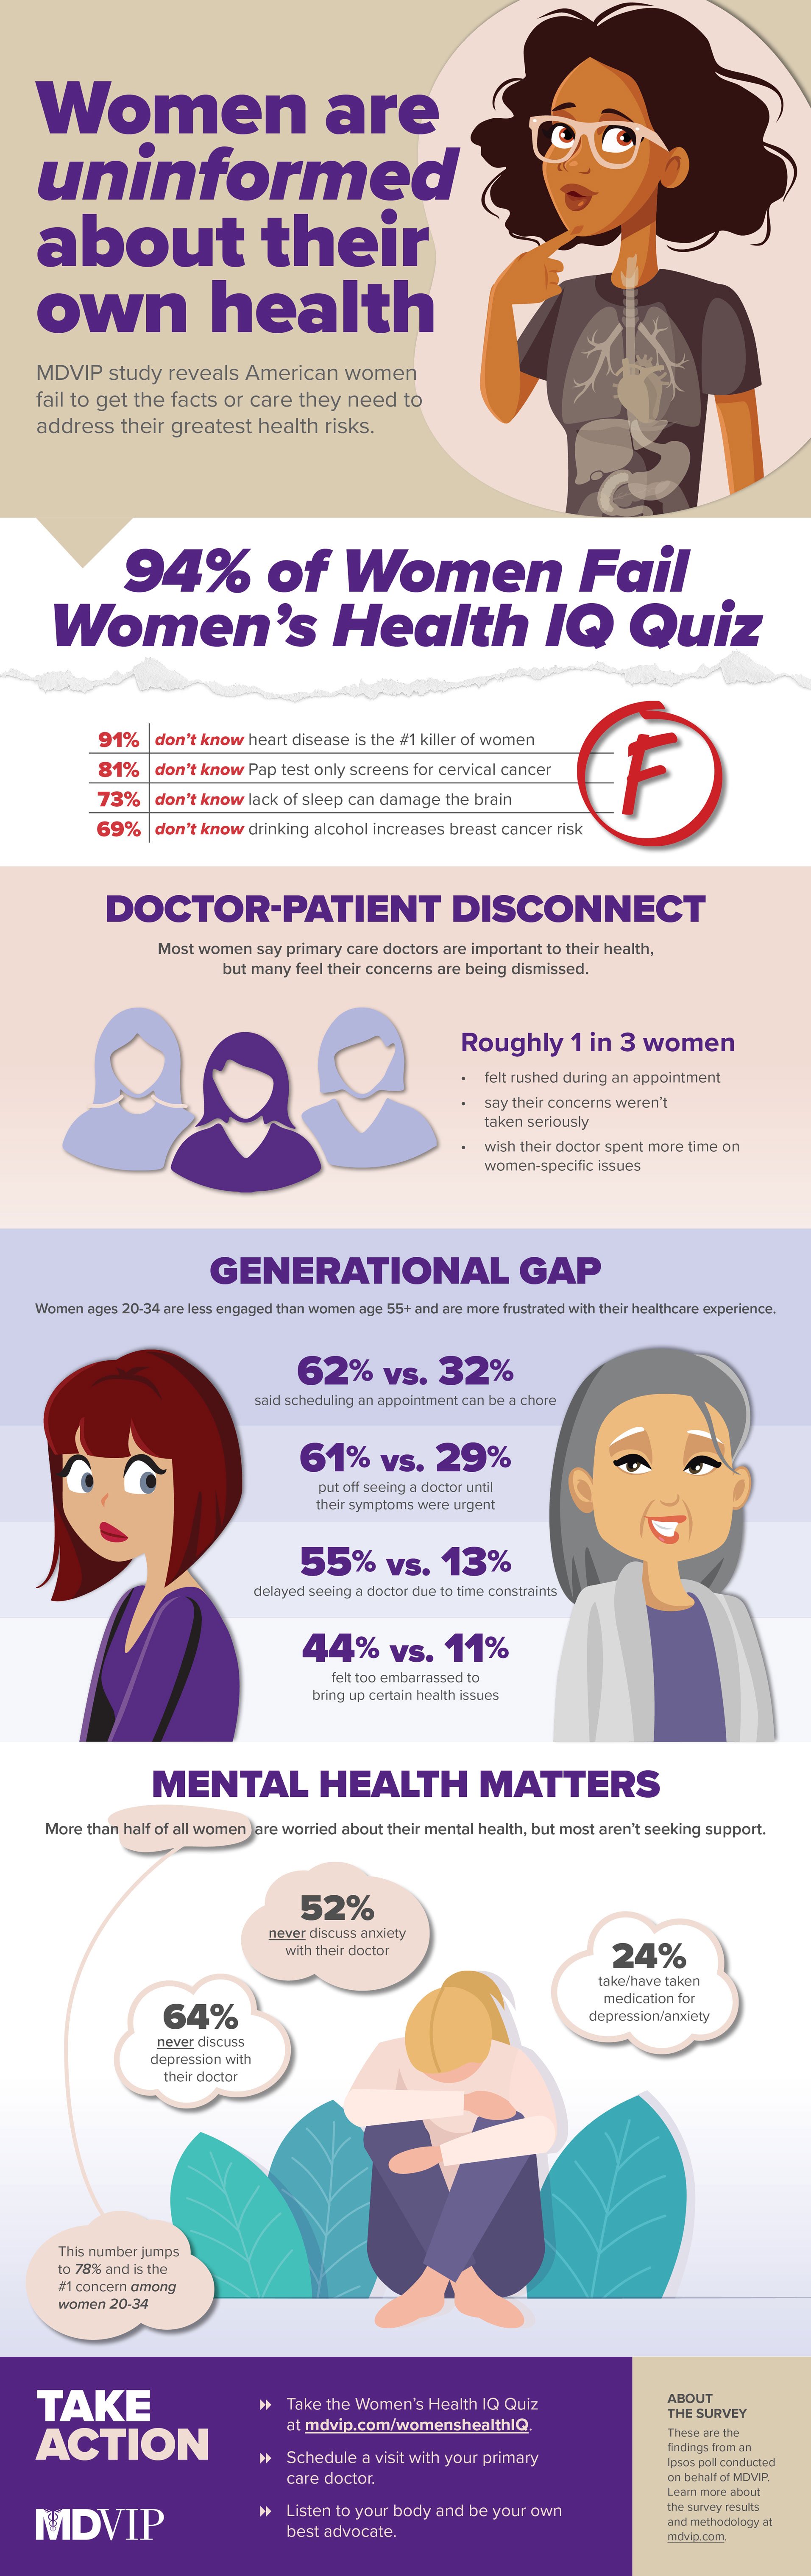 By the numbers: Here's what women told us about their healthcare experience